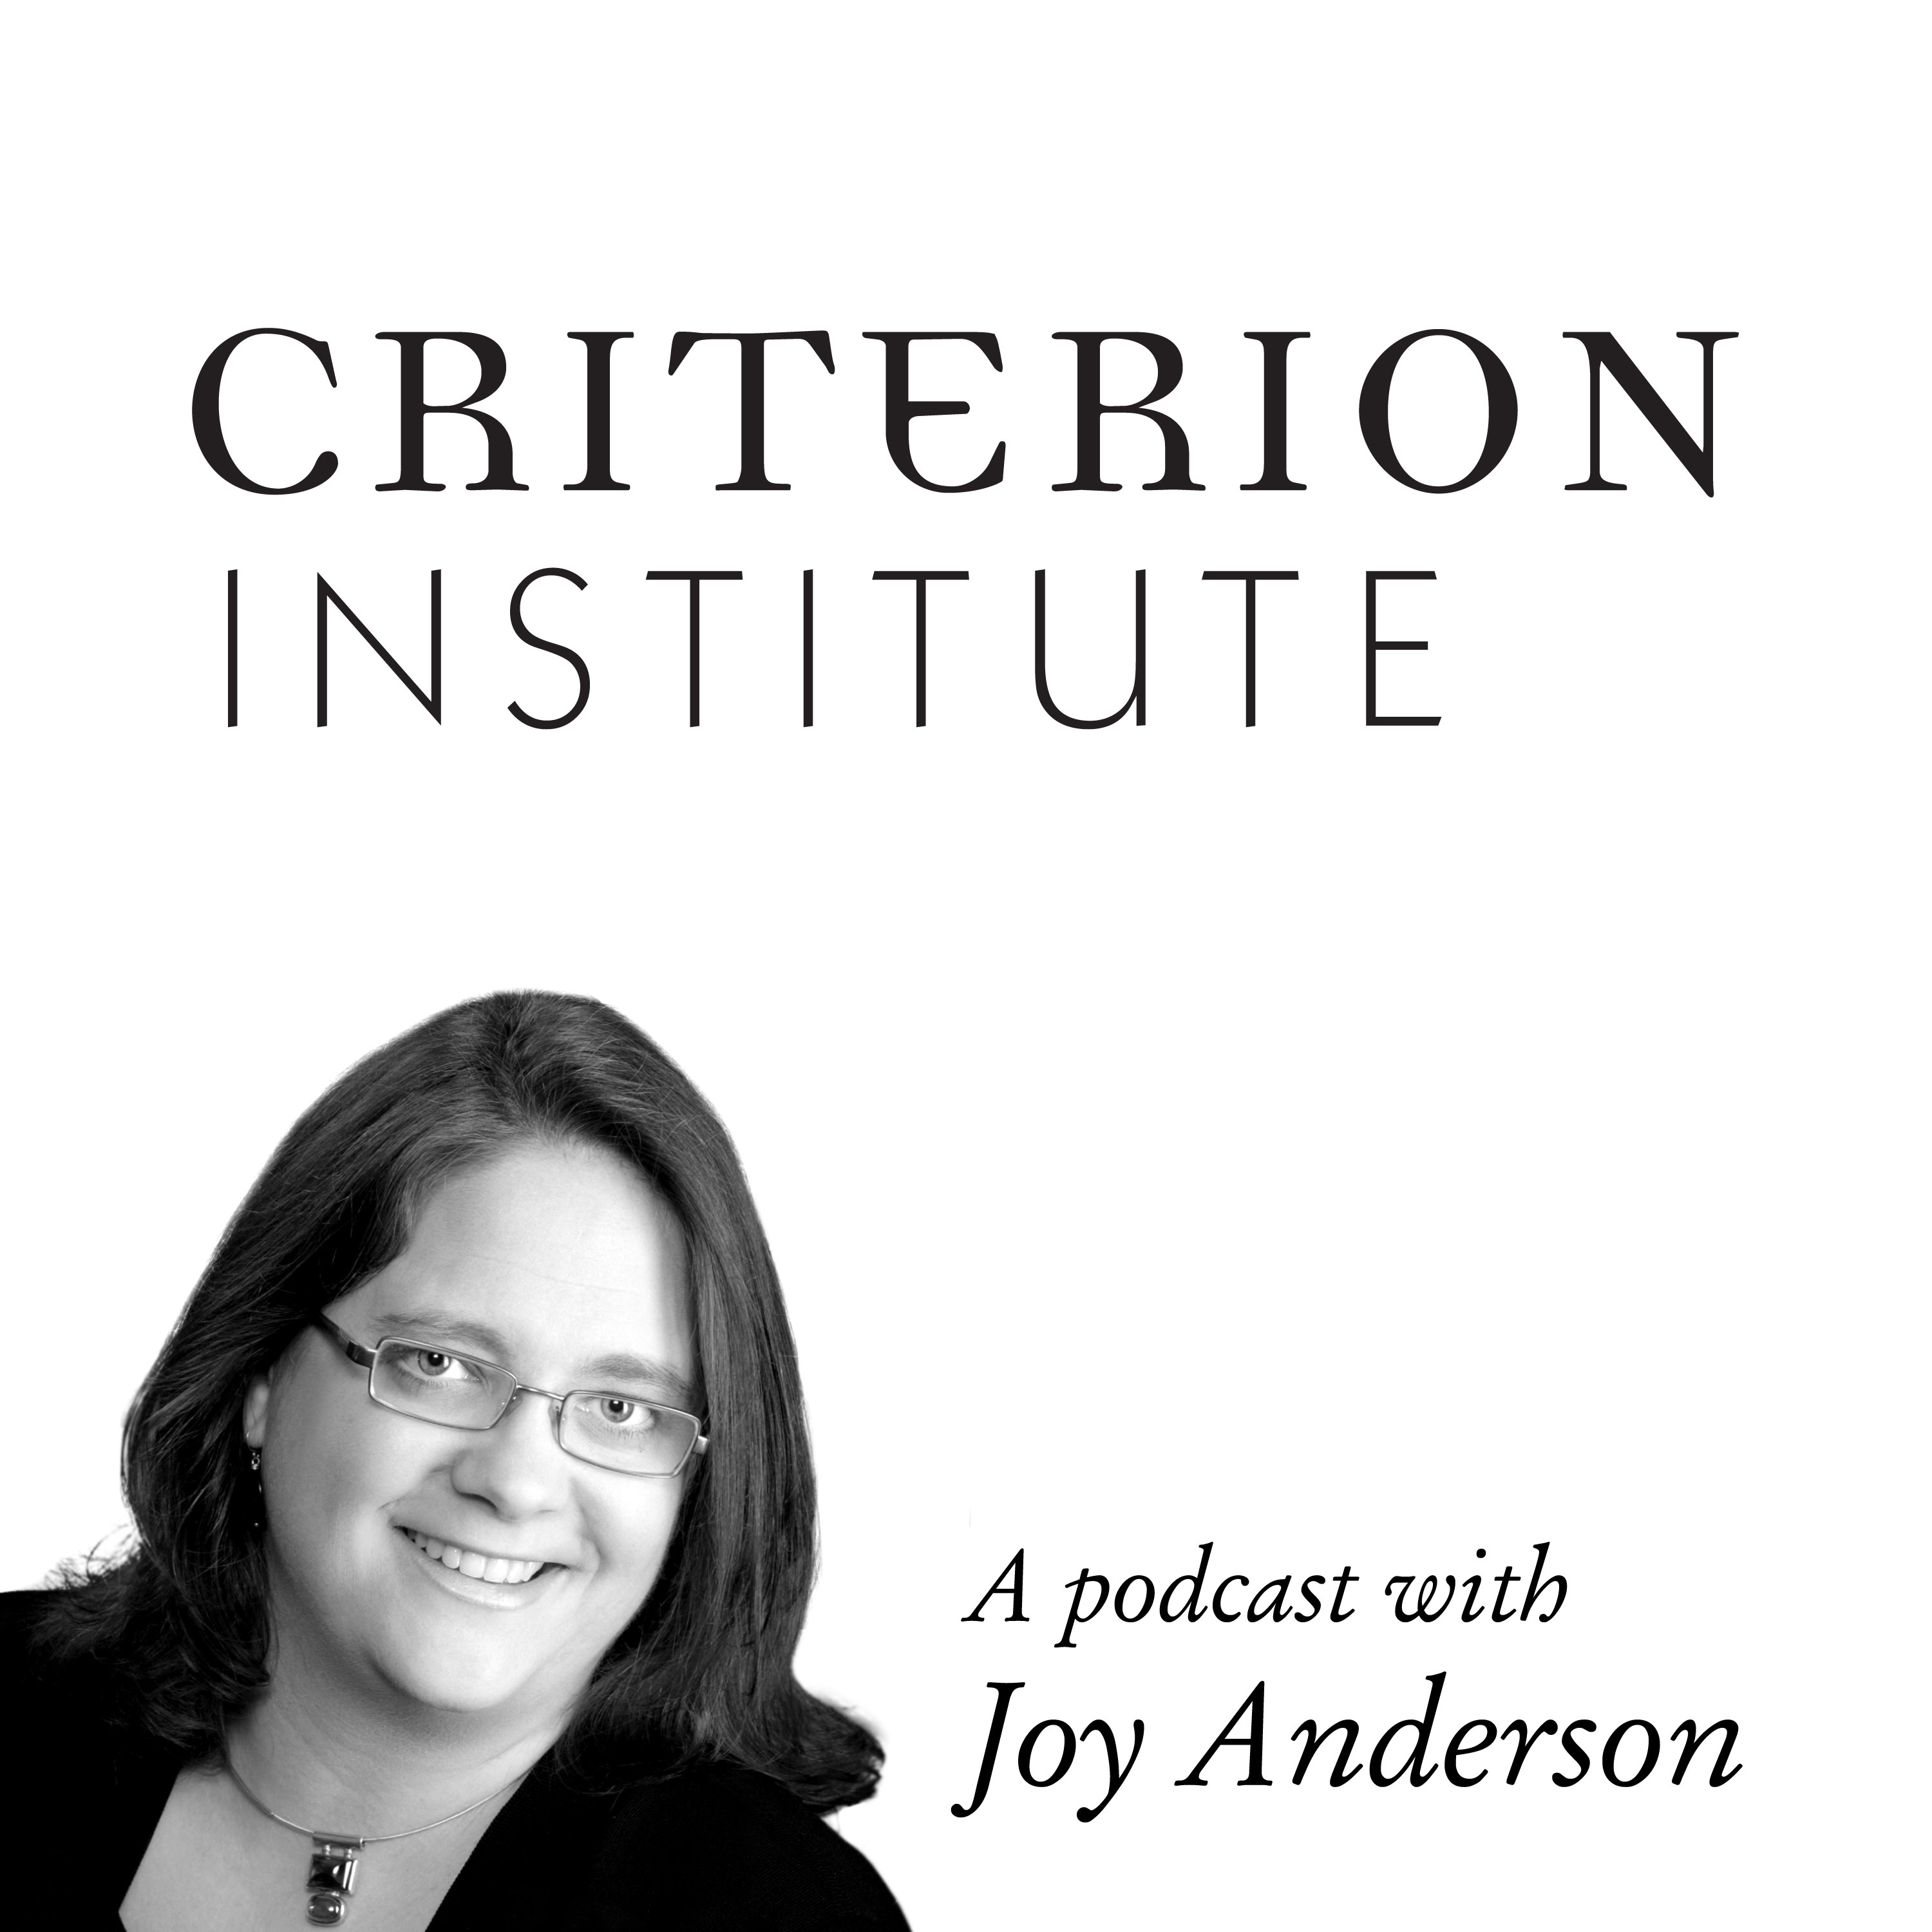 Artwork for podcast The Criterion Institute Podcast